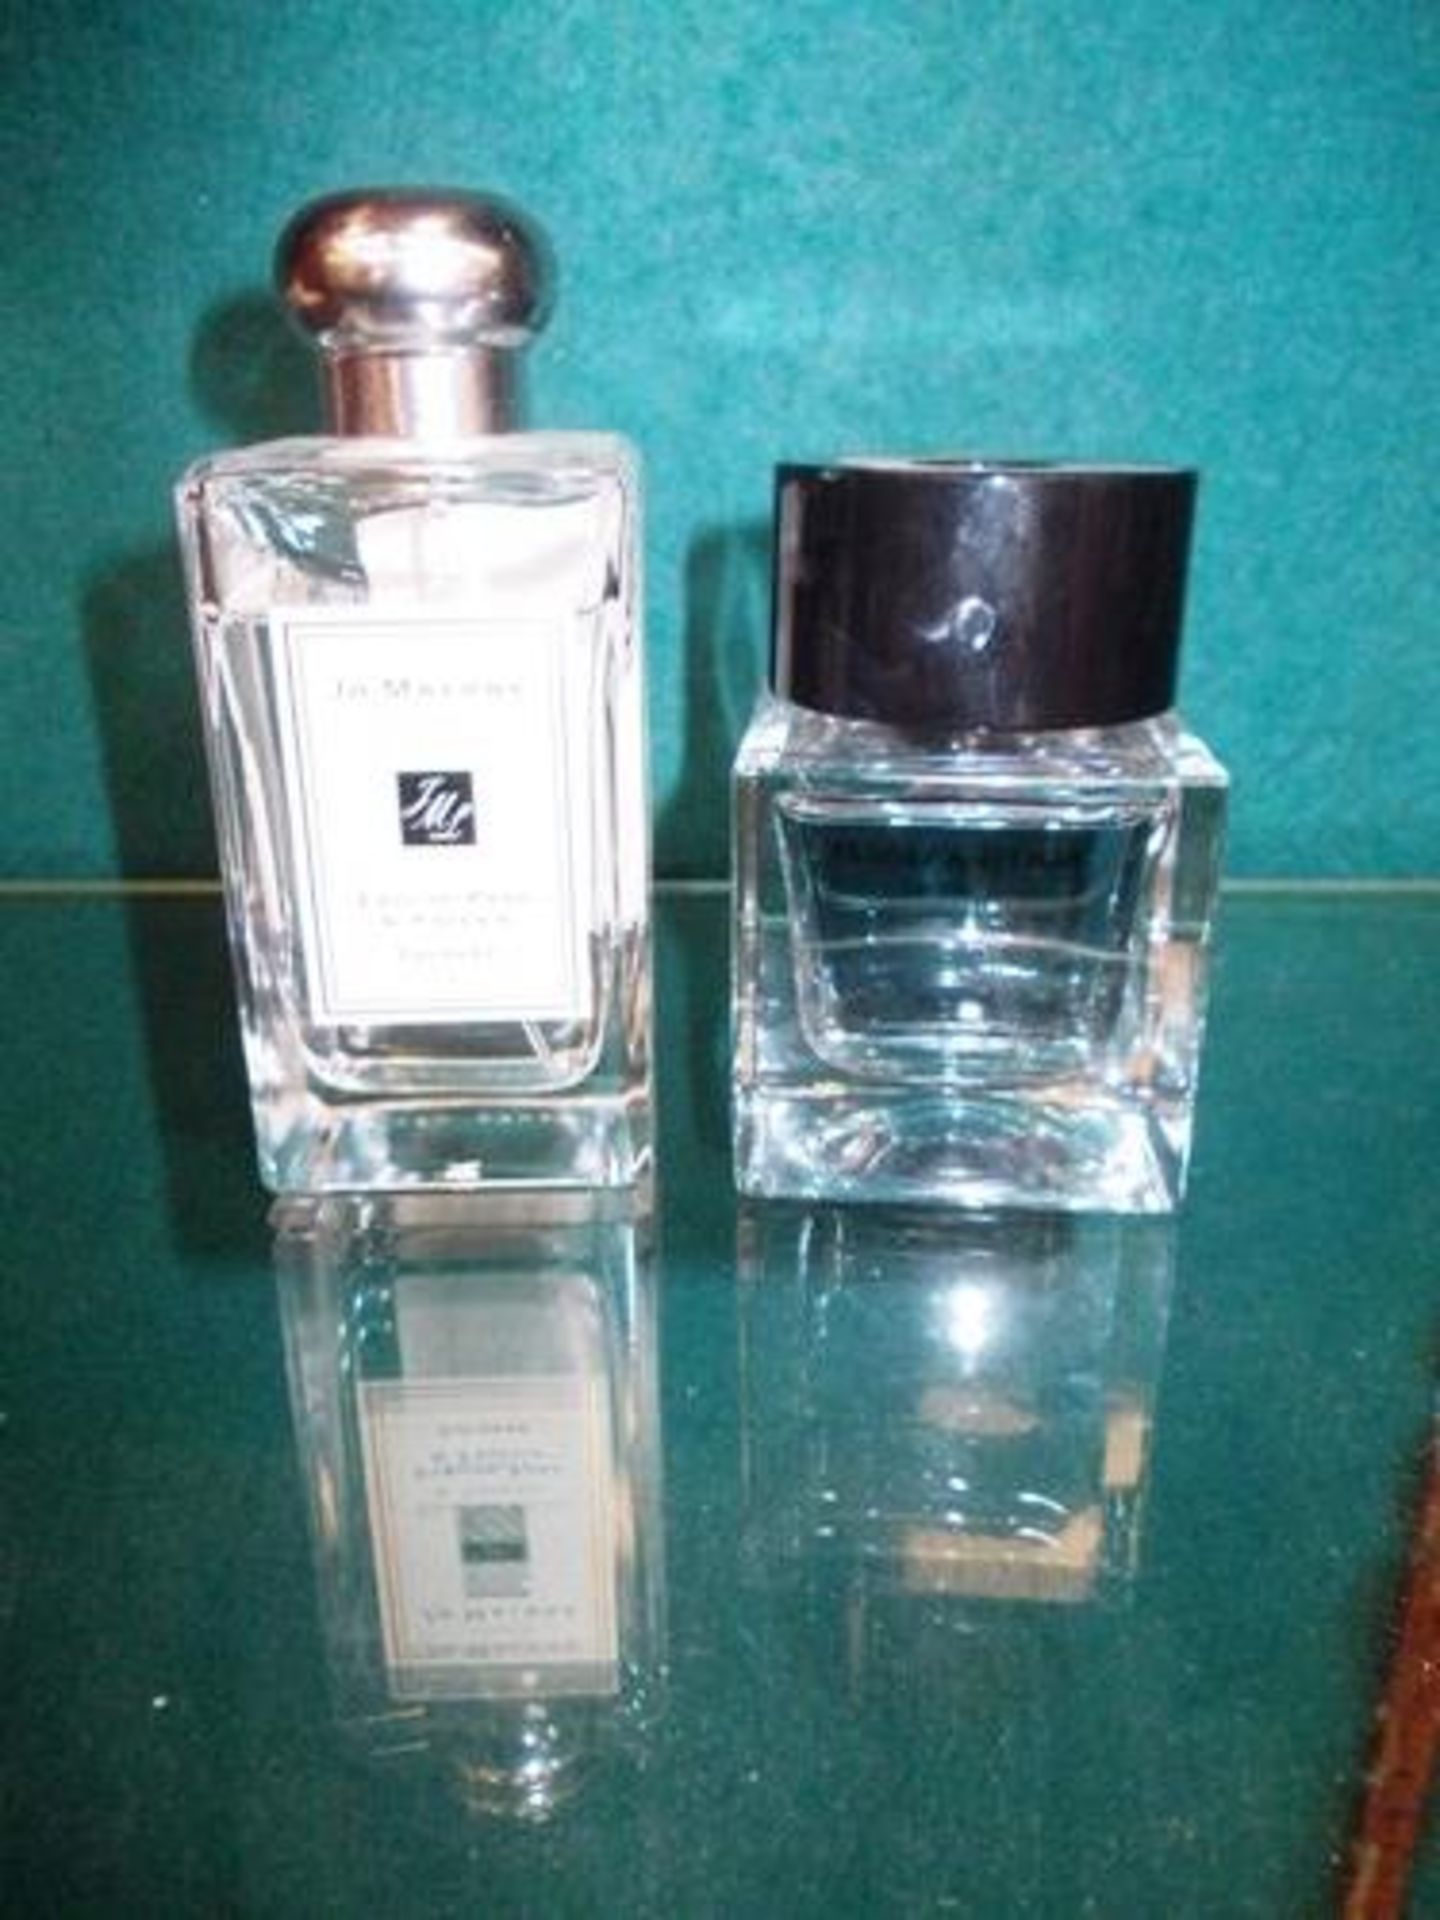 2 x part used colognes comprising 1 x 100ml Jo Malone cologne, approximately 80\% full and 1 x